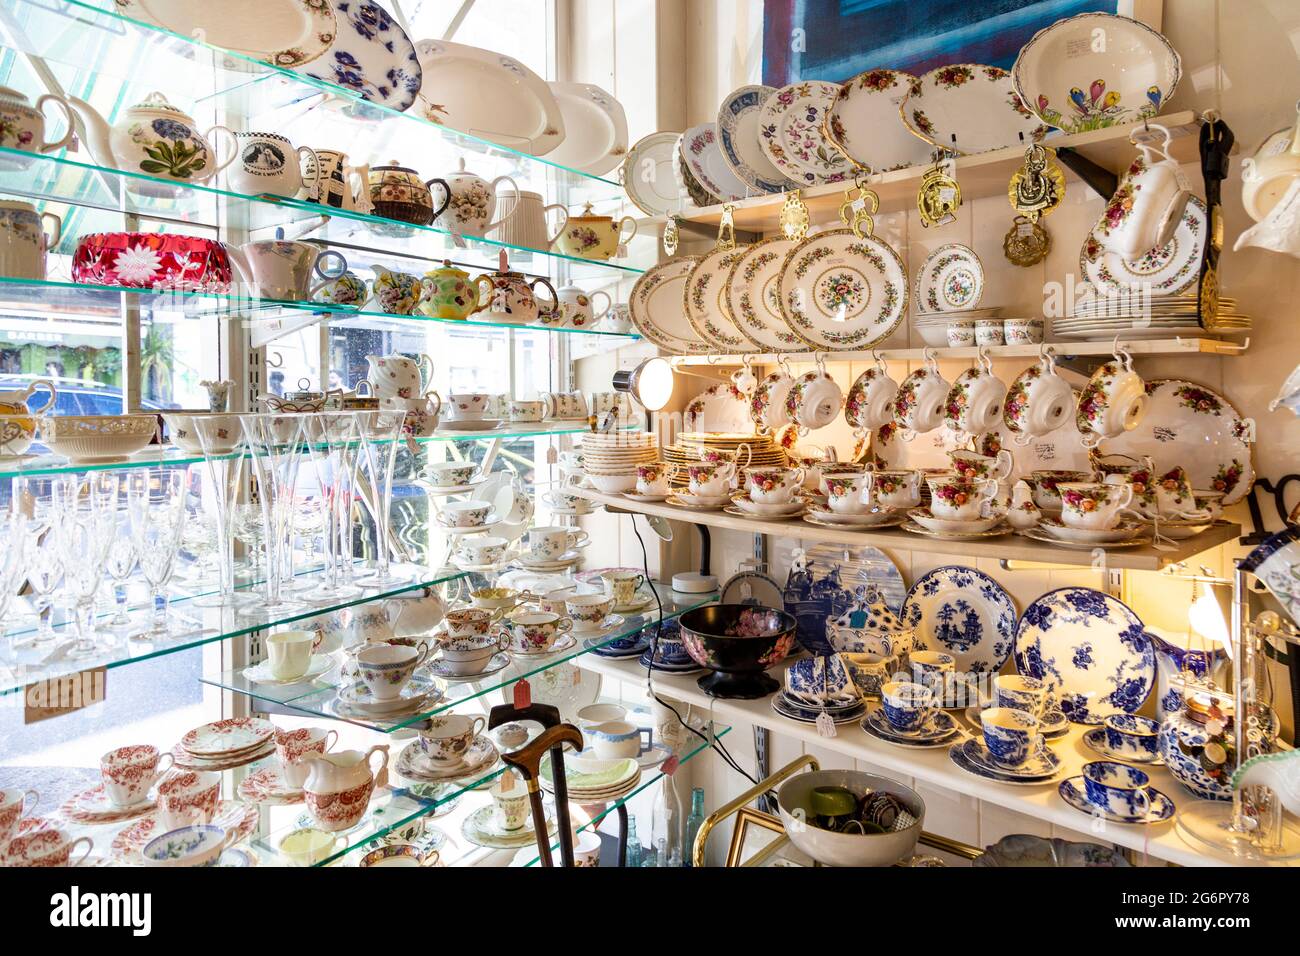 Display of crockery, porcelain and glassware at an antique shop (Hampton Court Emporium, East Molesey, UK) Stock Photo